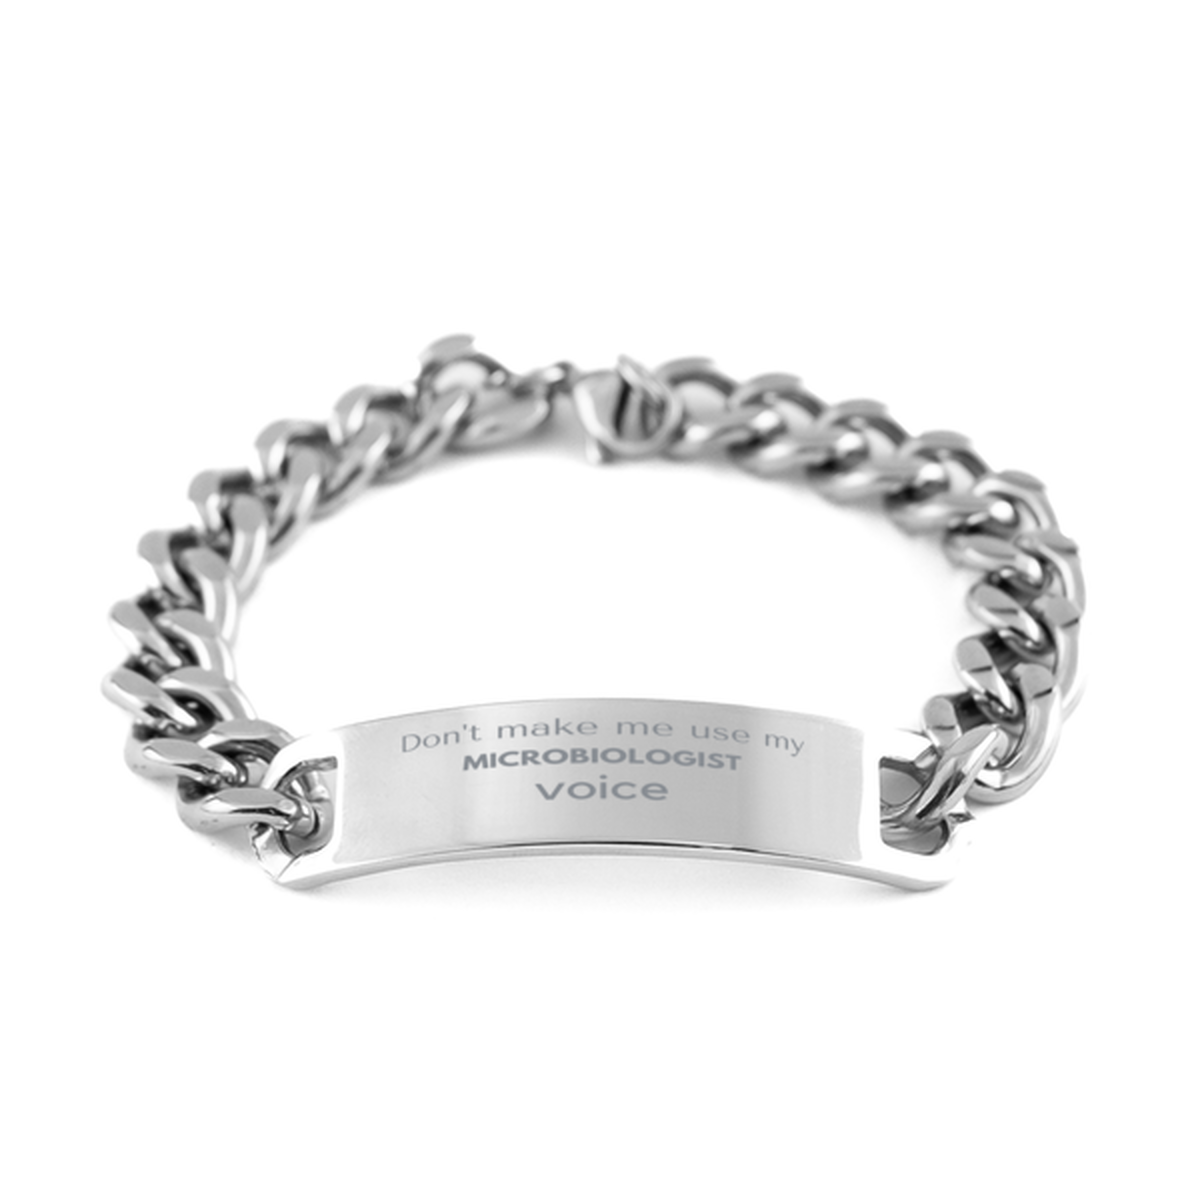 Don't make me use my Microbiologist voice, Sarcasm Microbiologist Gifts, Christmas Microbiologist Cuban Chain Stainless Steel Bracelet Birthday Unique Gifts For Microbiologist Coworkers, Men, Women, Colleague, Friends